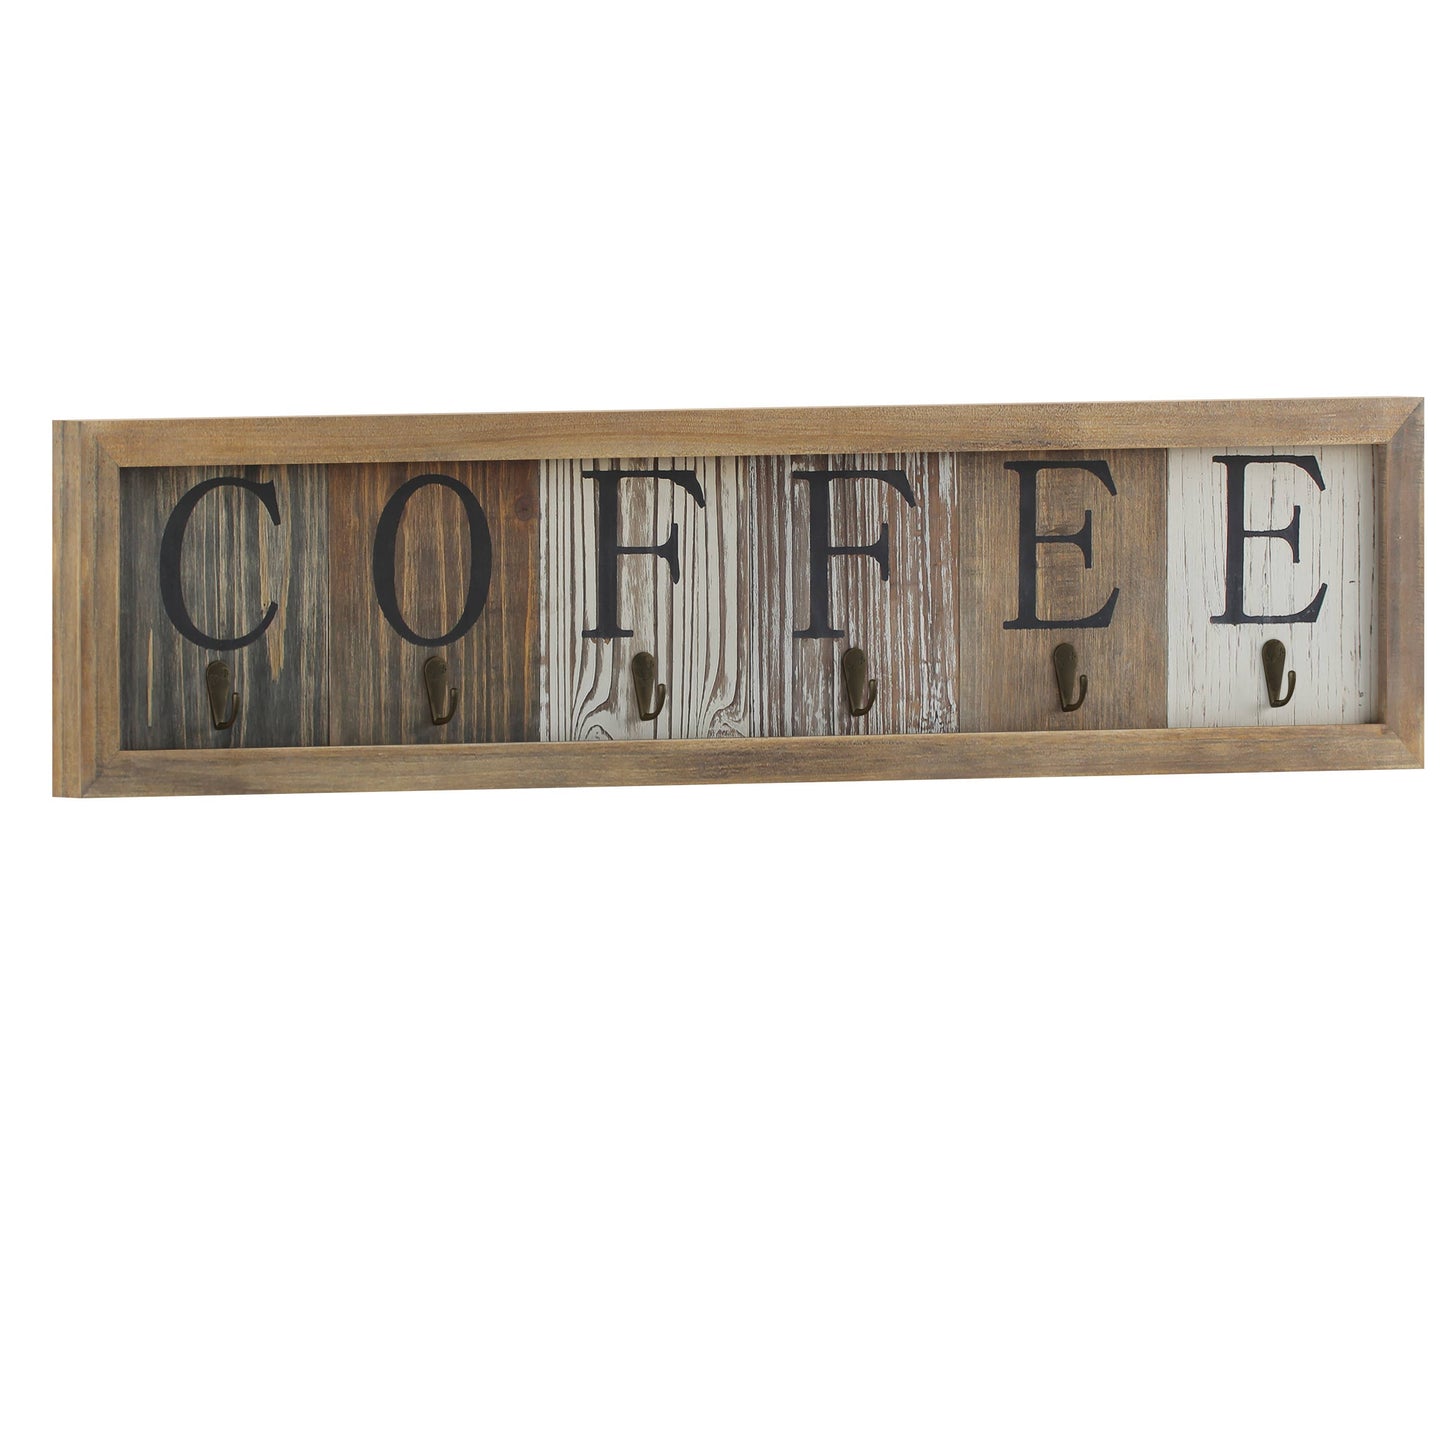 HBCY Distressed Printed Coffee Cup Rack with Hooks